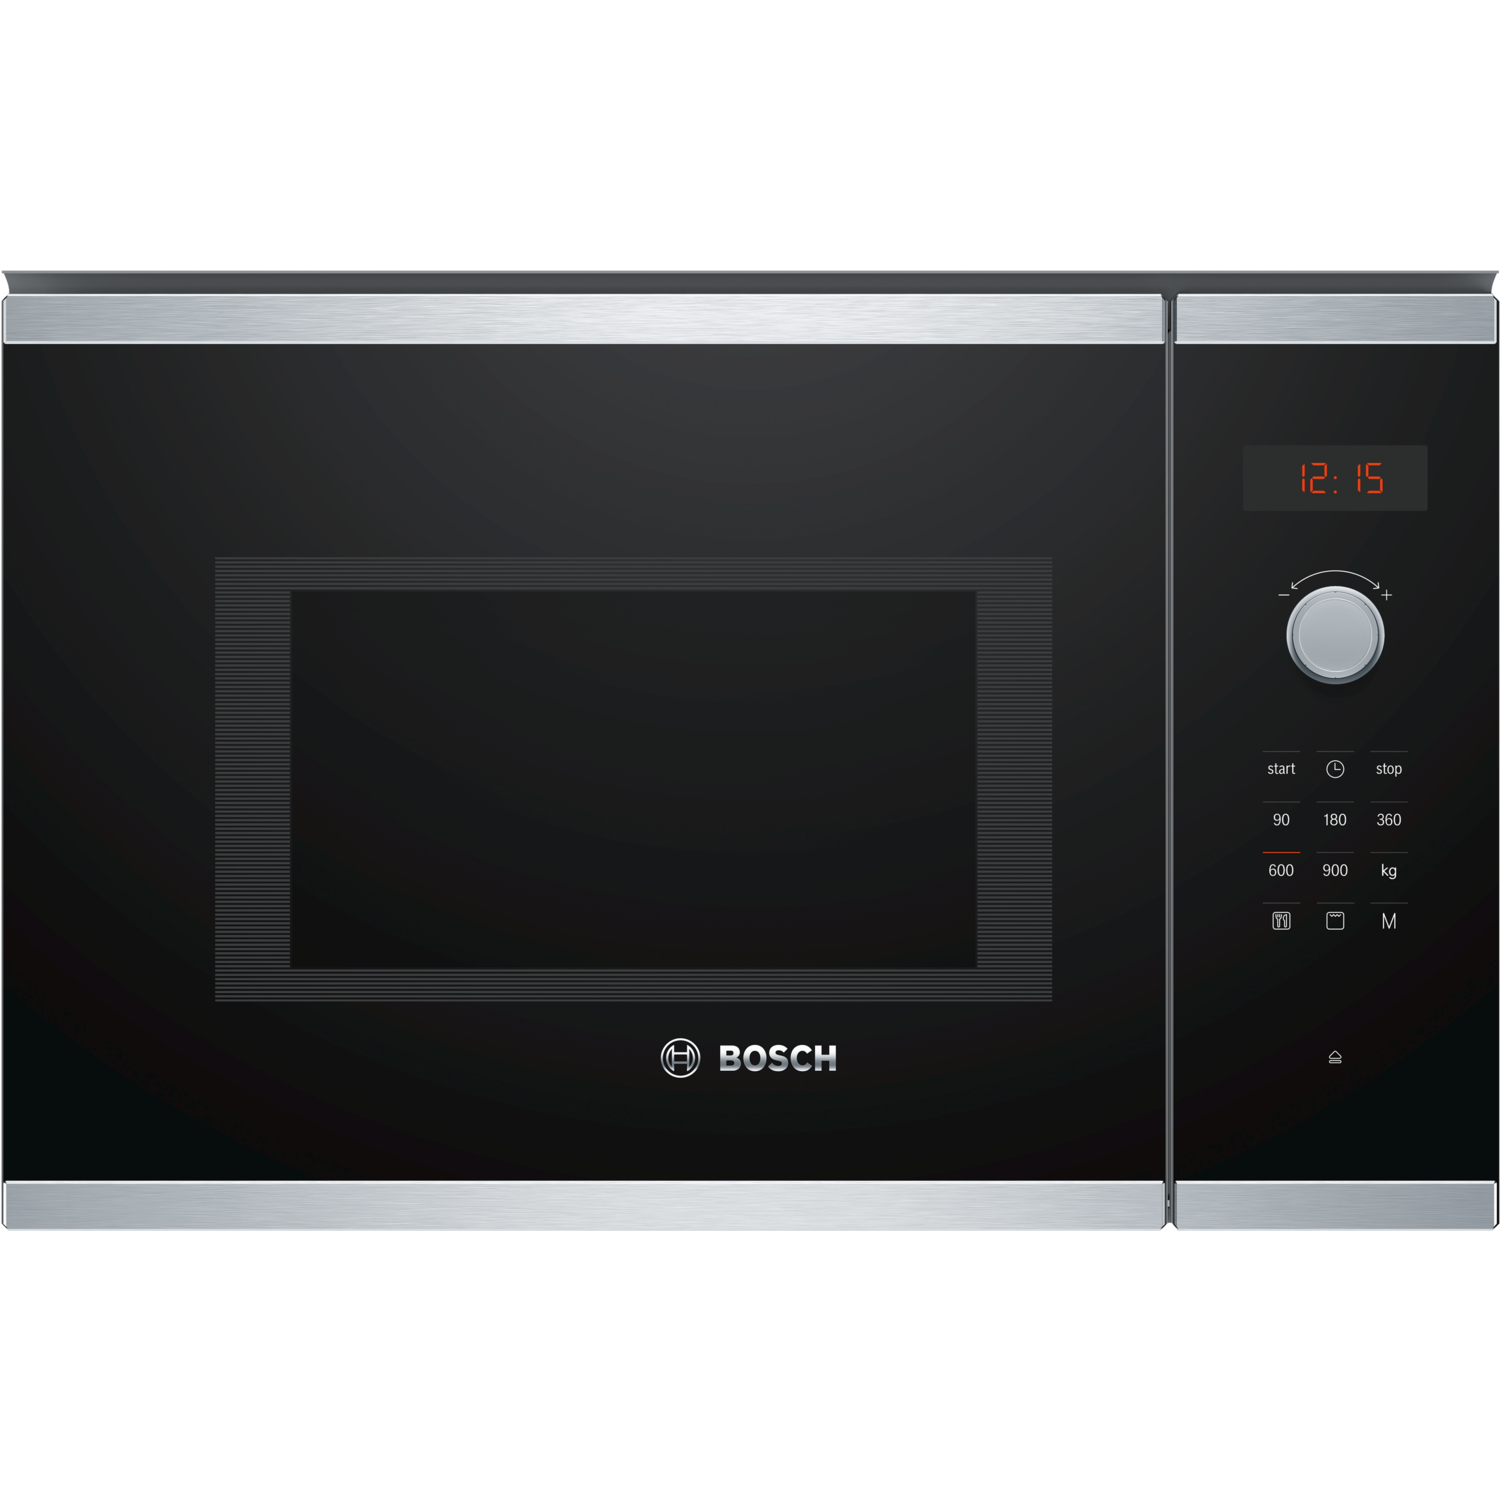 Bosch Serie 4 25L 900W Built-in Microwave with Grill - Stainless Steel